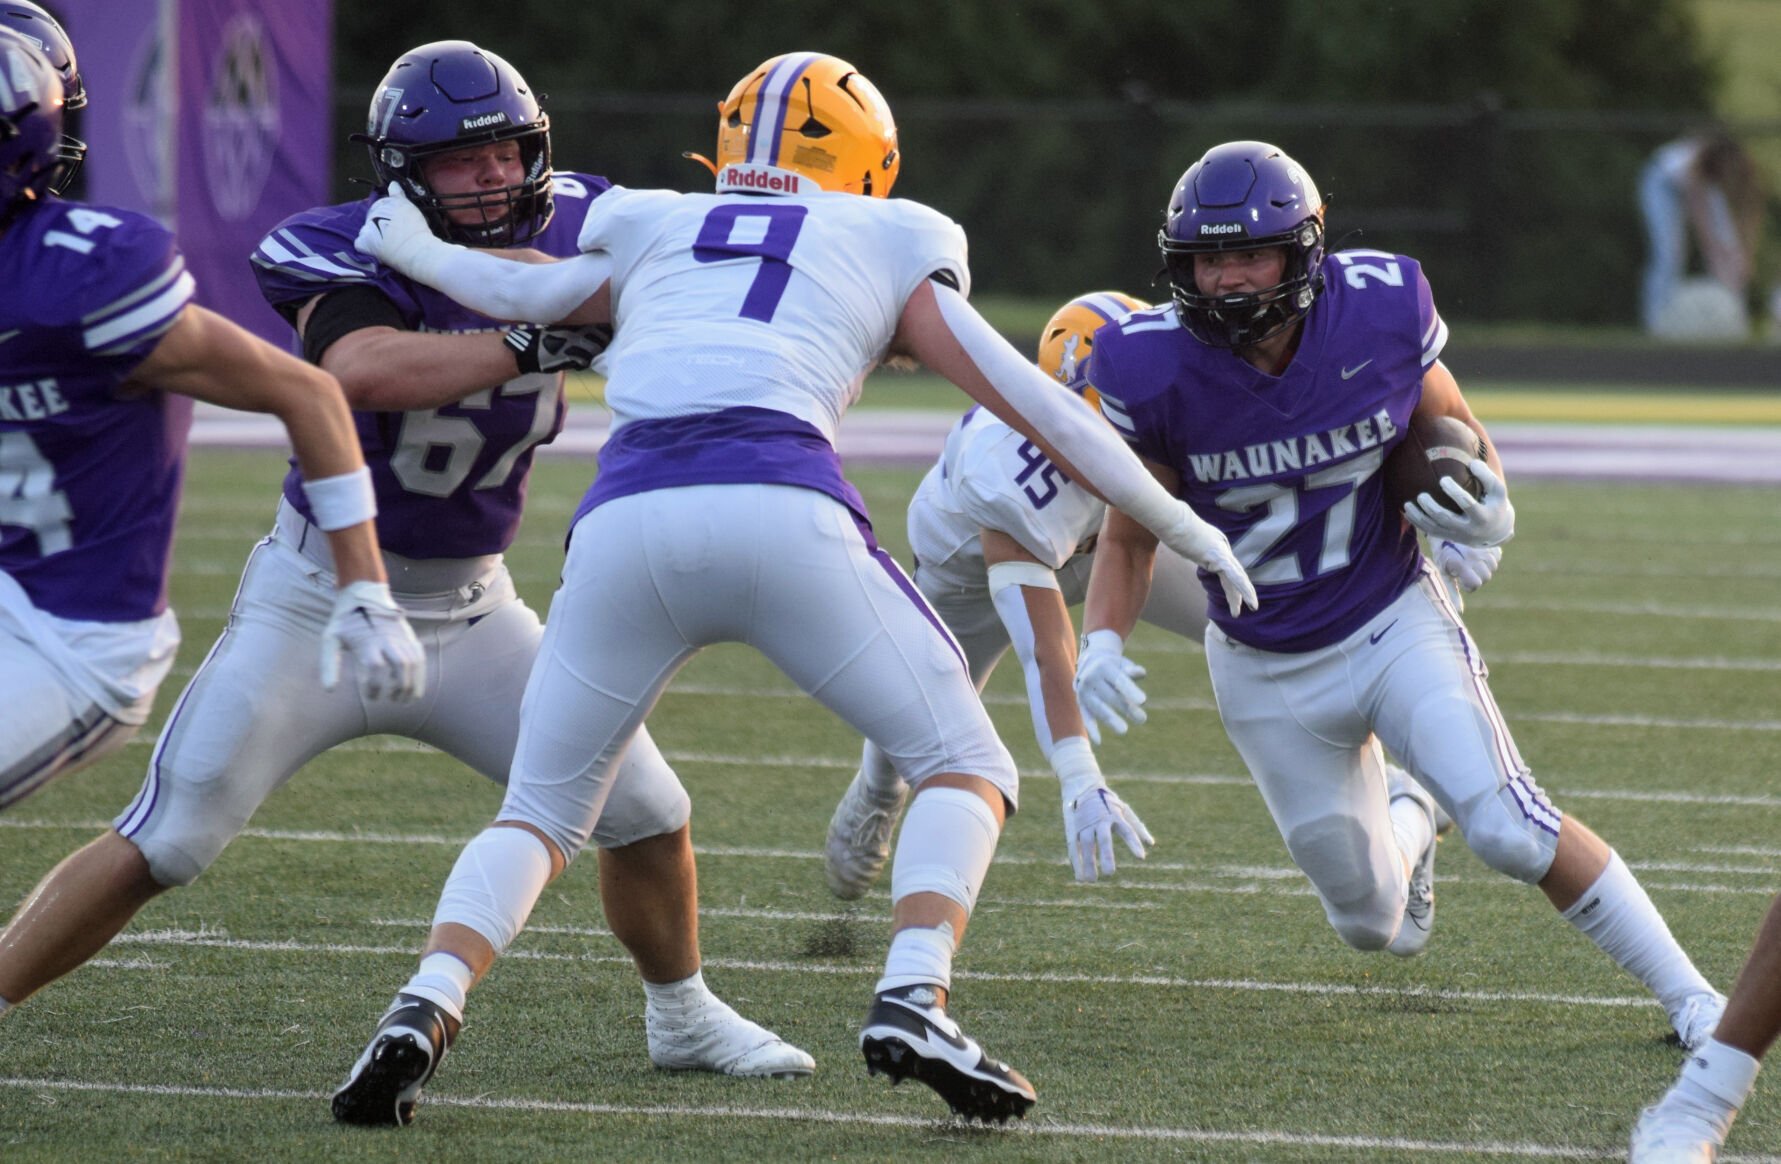 Waunakee High School’s Dominant Offensive Line Prepared for State Semifinal Showdown